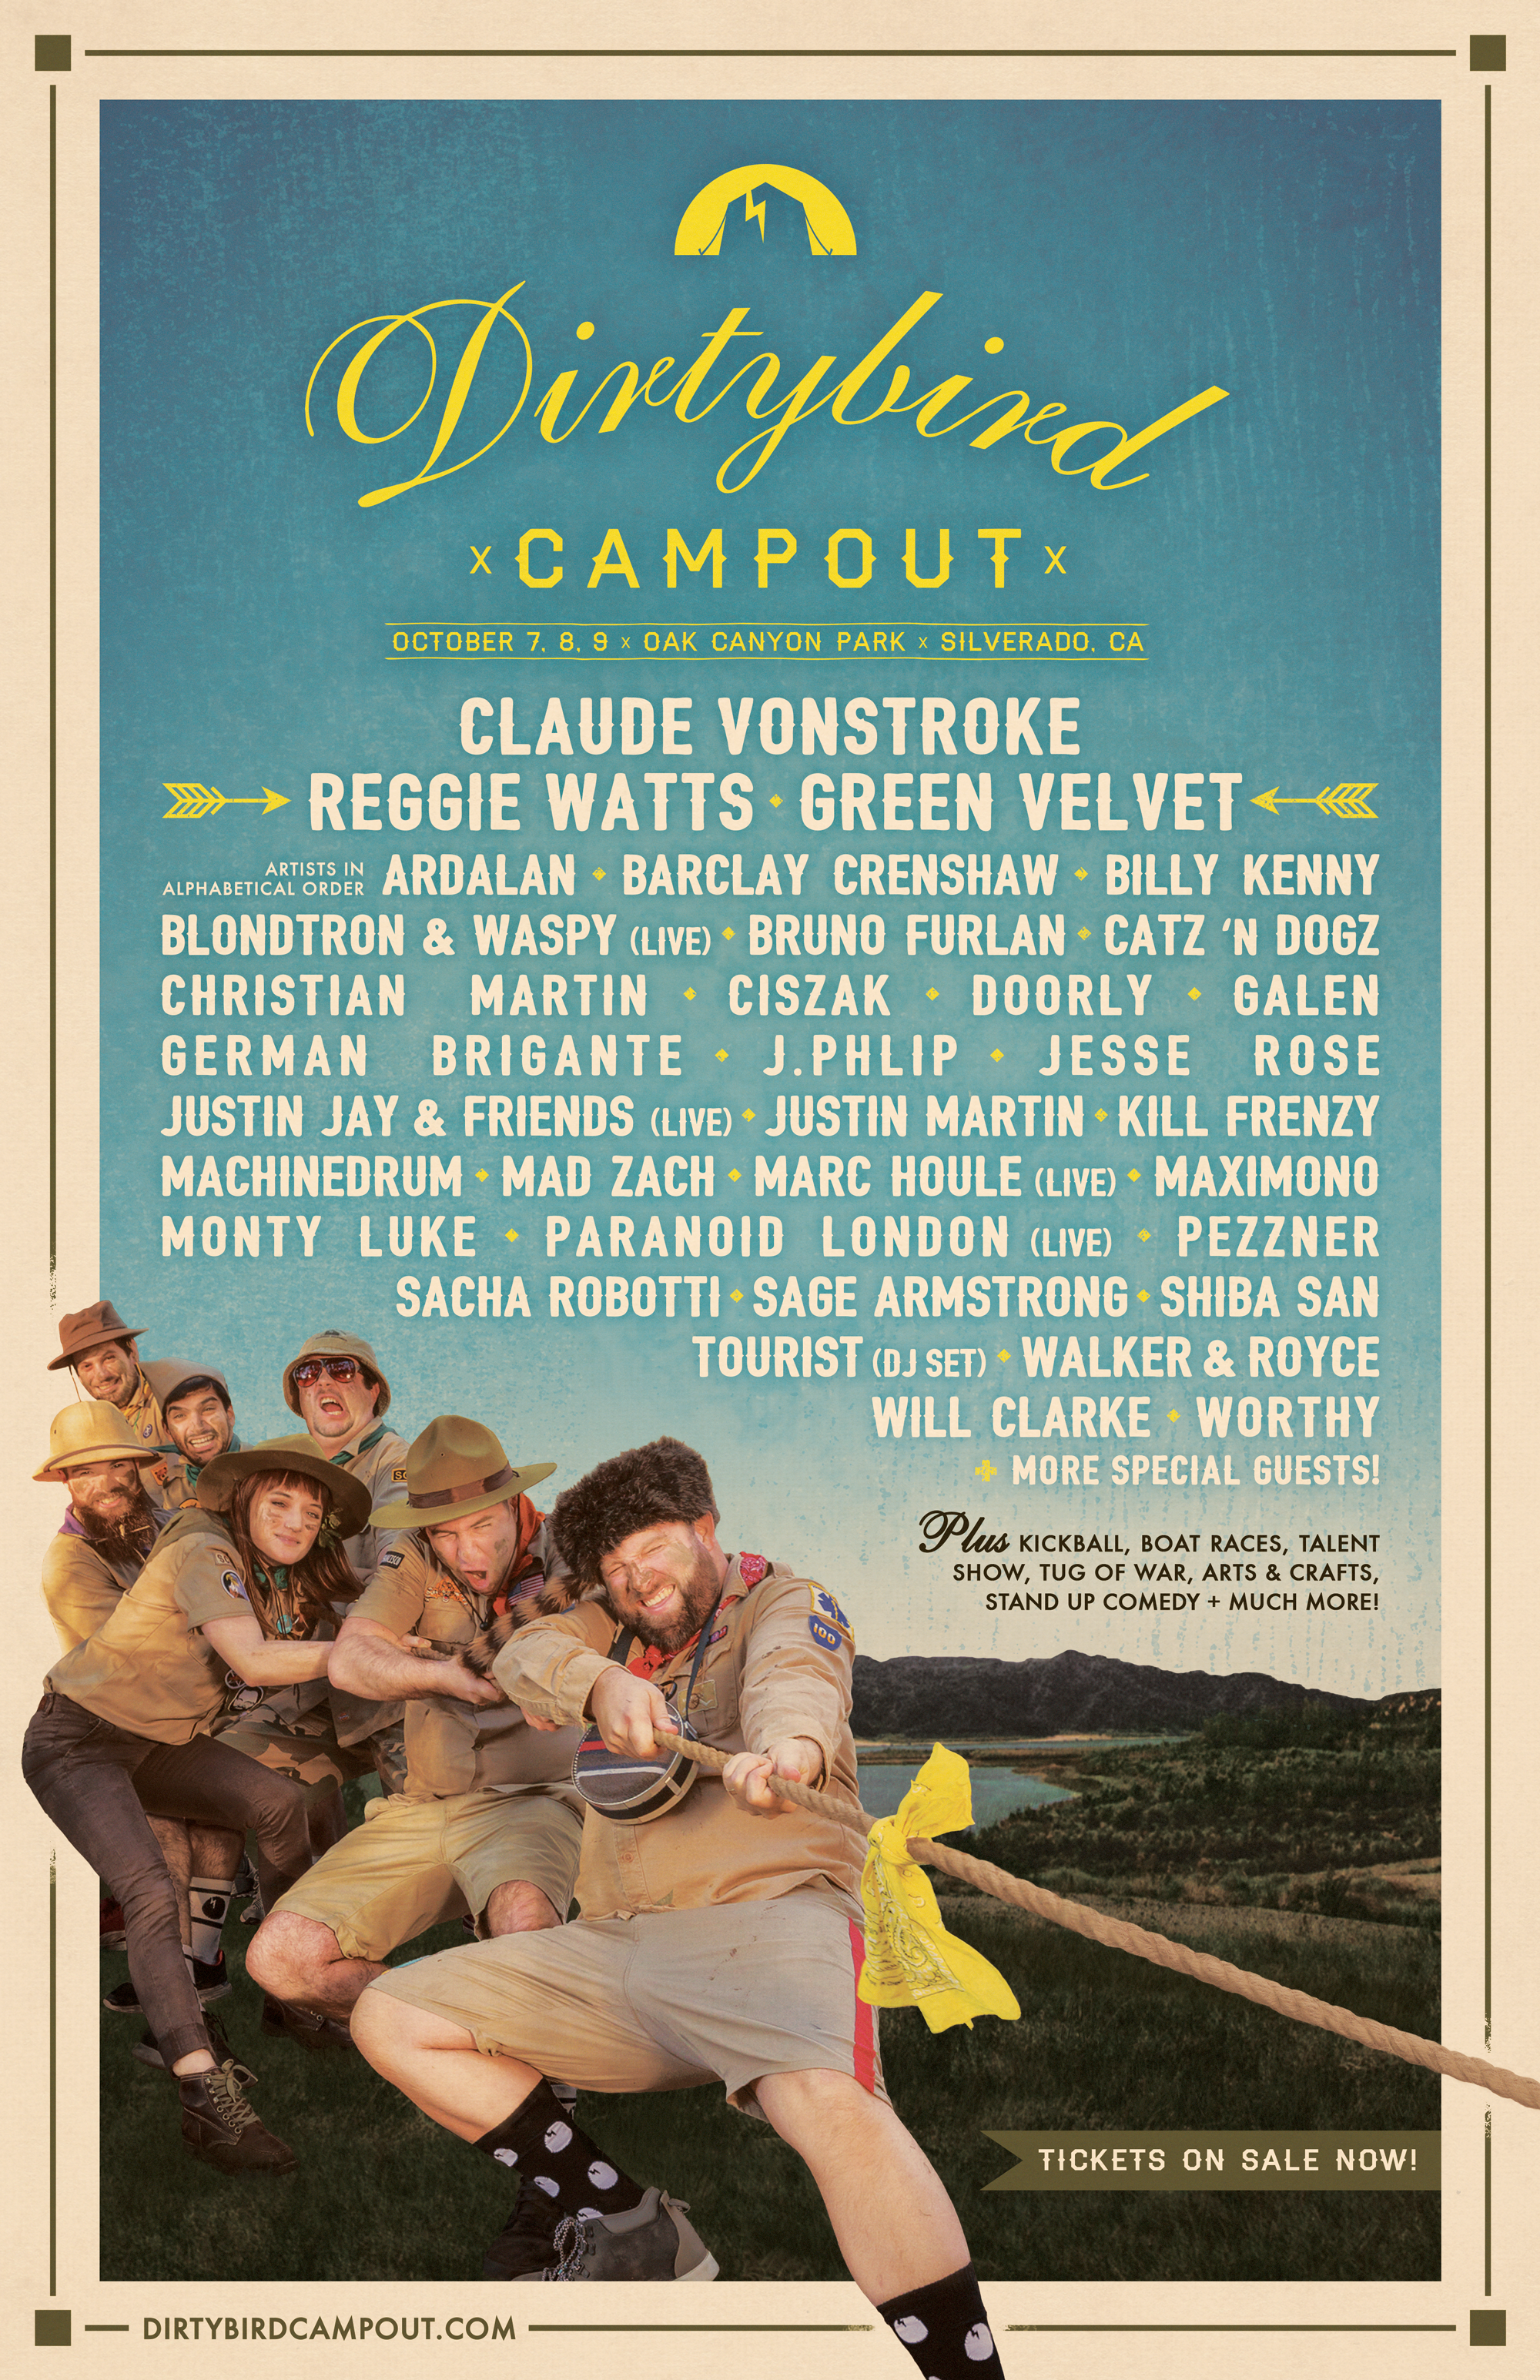 [FESTIVAL PREVIEW] Dirtybird Campout Is Not Something You Want To Miss In 2016